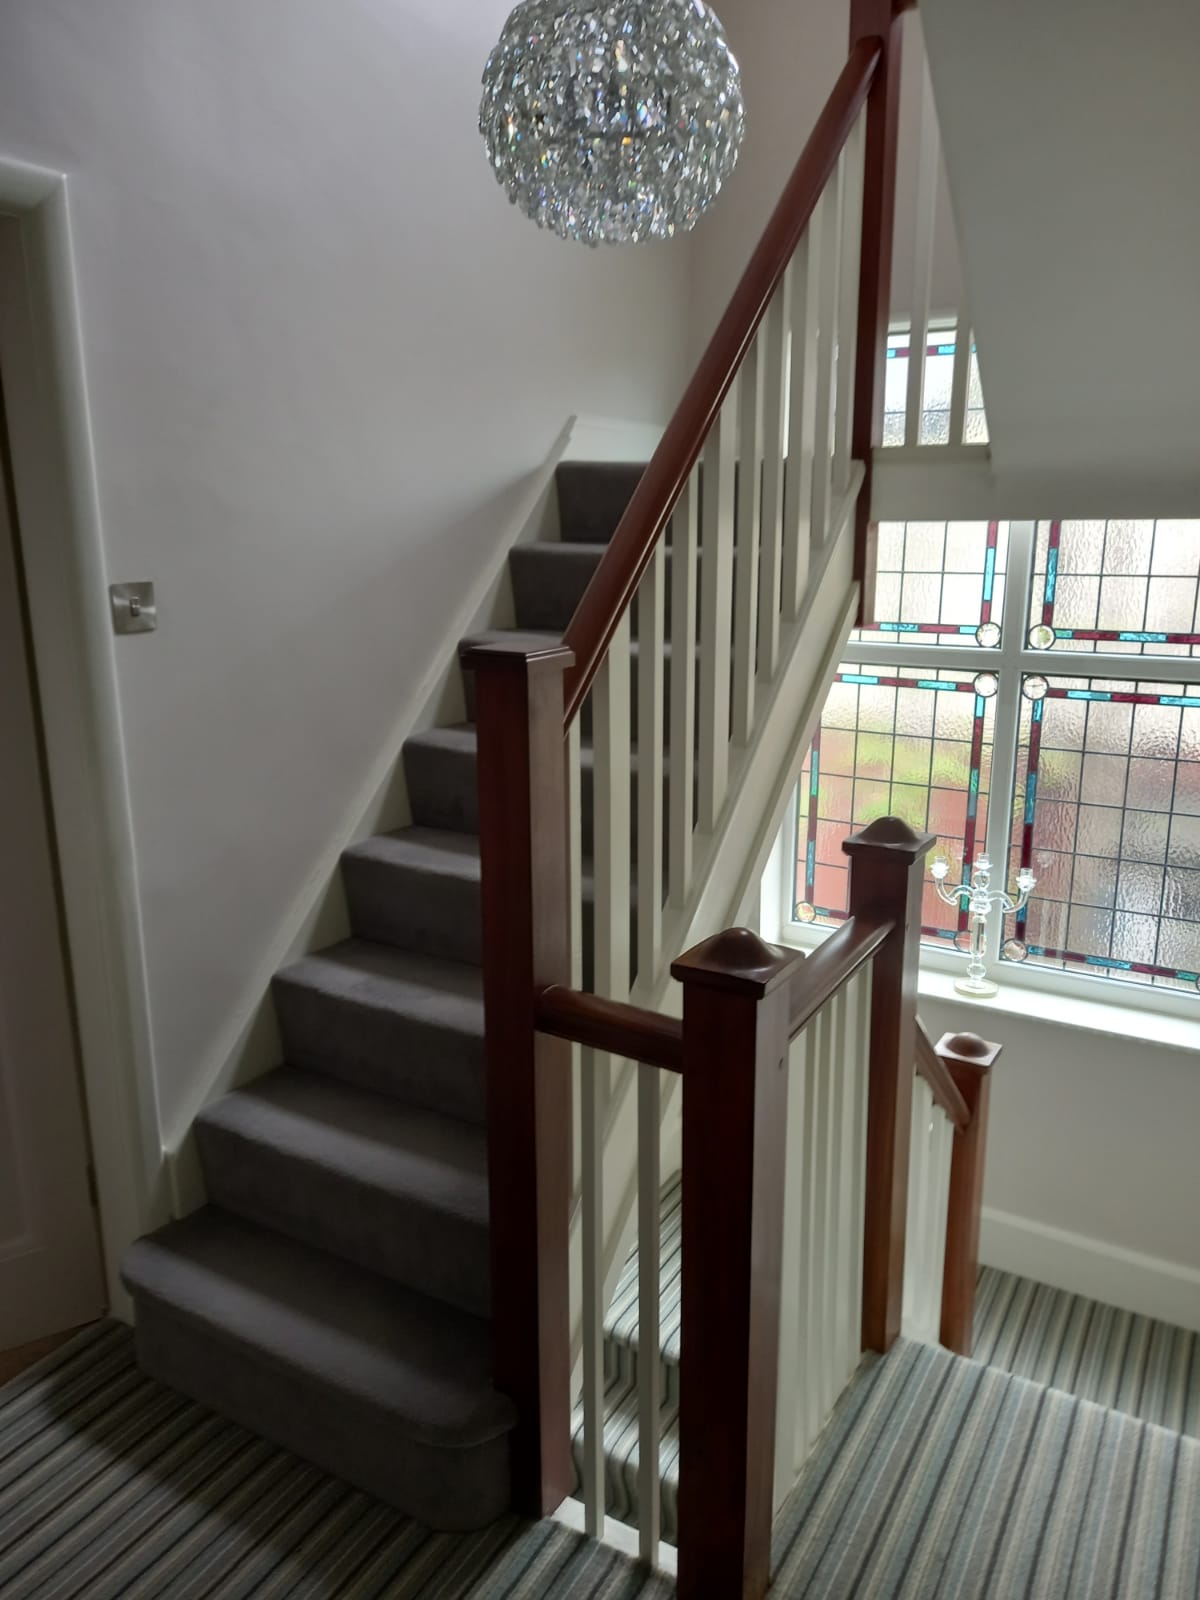 A new staircase to a loft conversion bedroom insulation installation built by topflite loft conversions in northwest england